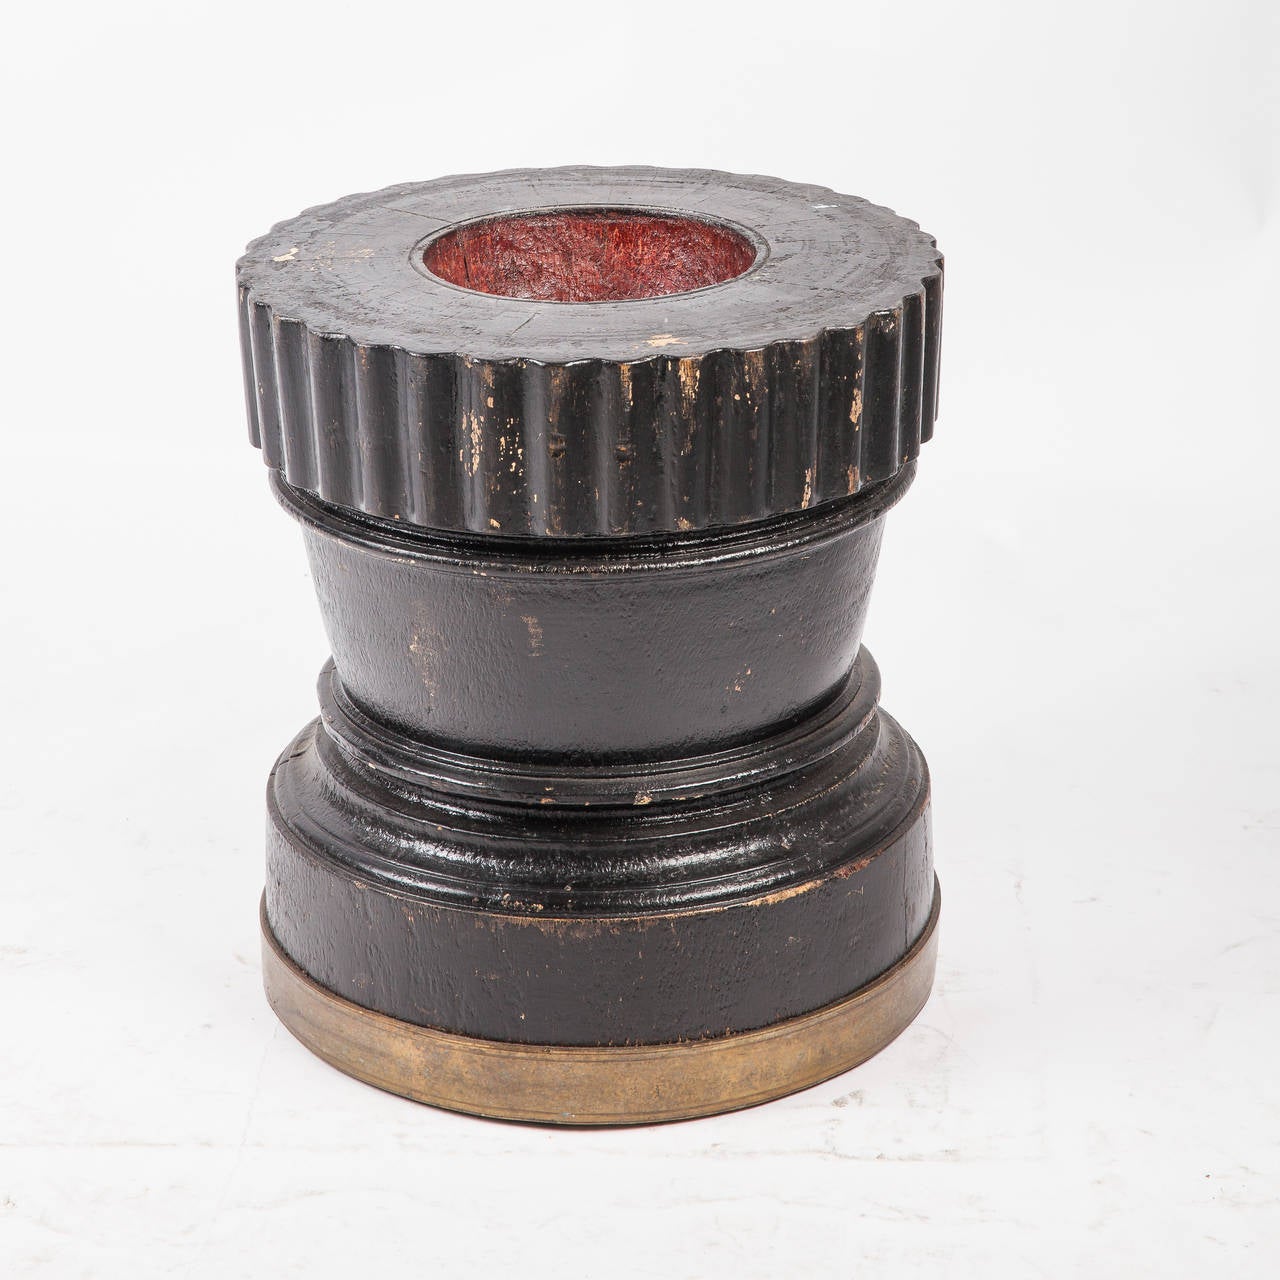 Solid wood rice grinder from Southern India with scalloped edge and brass detail at base. Rice was poured into the top concavity and pounded into flour using a heavy wooden pole. Makes a great side or drink table. Others are available.